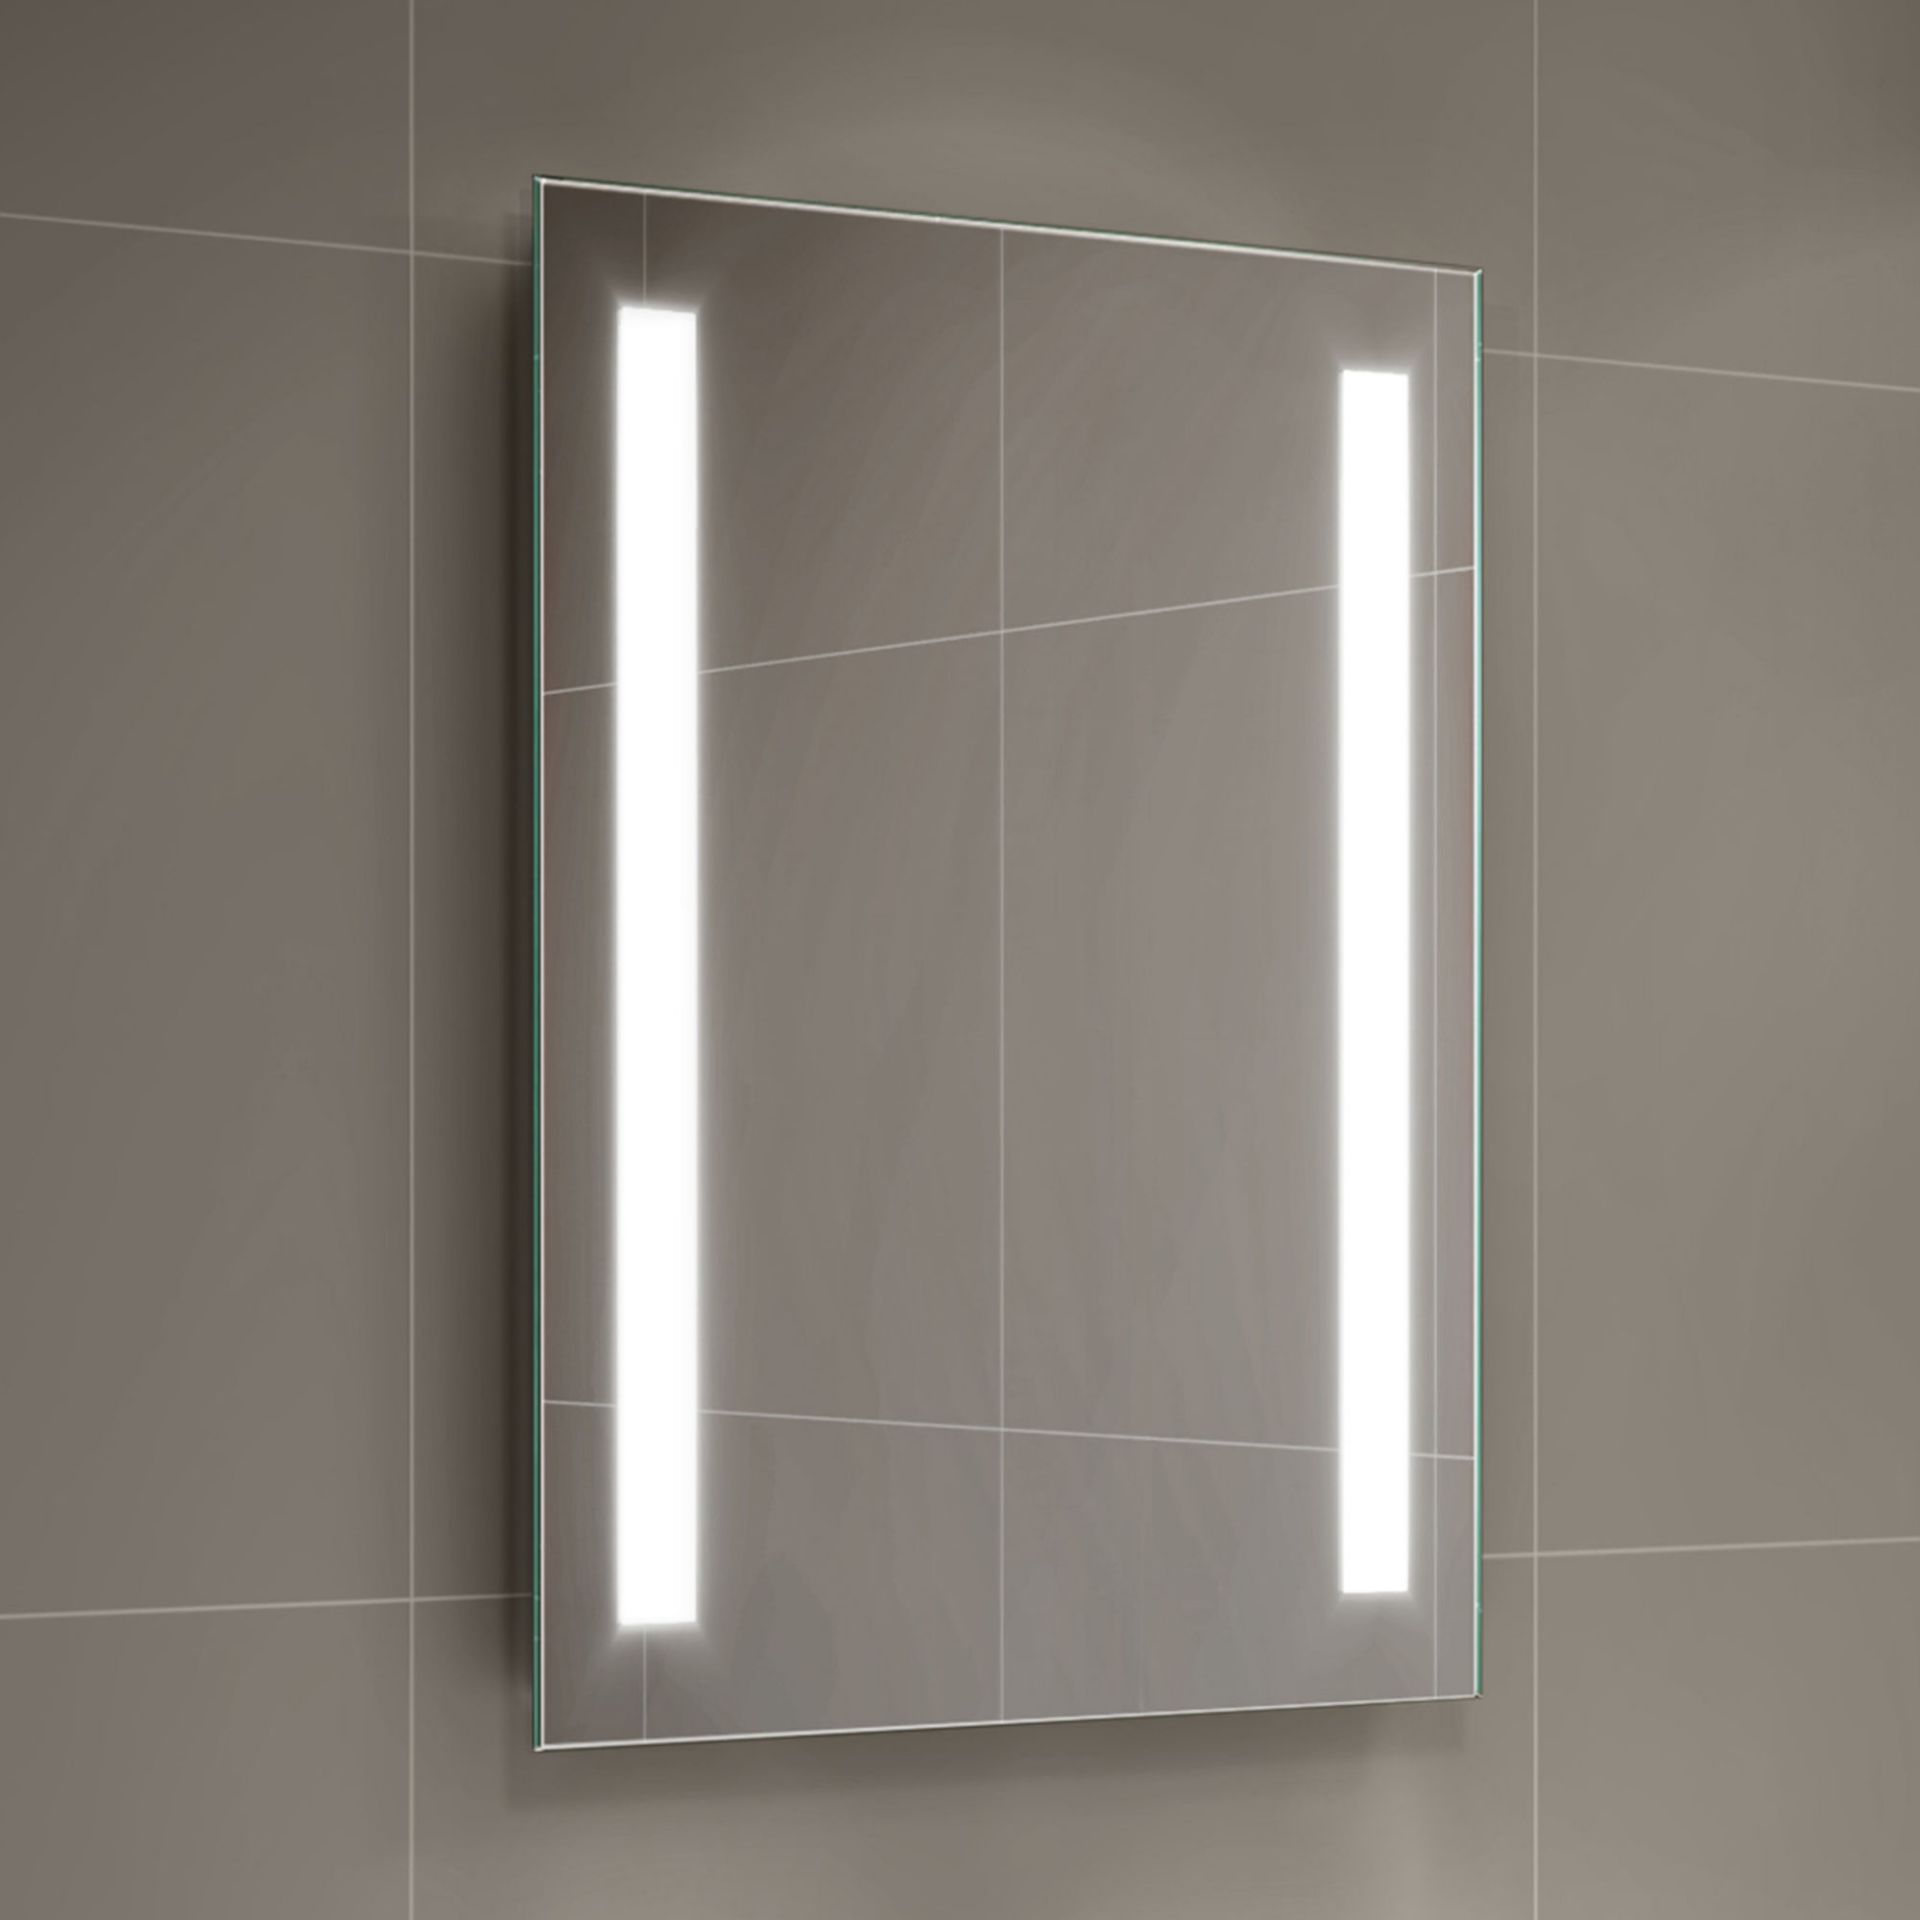 (TP195) 500x700mm Omega Illuminated LED Mirror - Battery Operated. Energy saving controlled On / Off